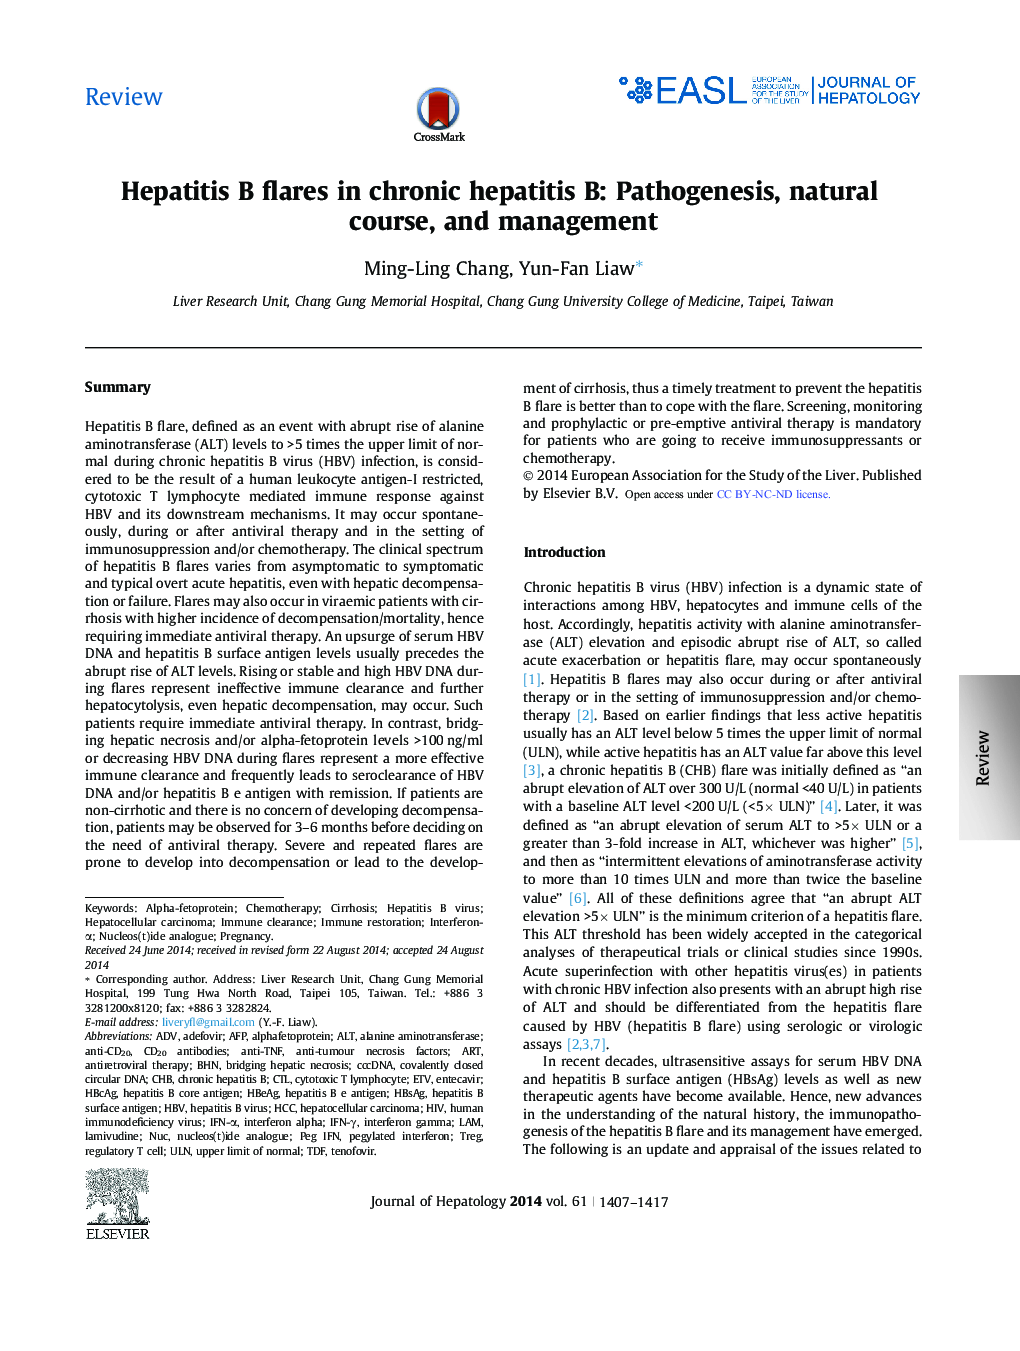 ReviewHepatitis B flares in chronic hepatitis B: Pathogenesis, natural course, and management